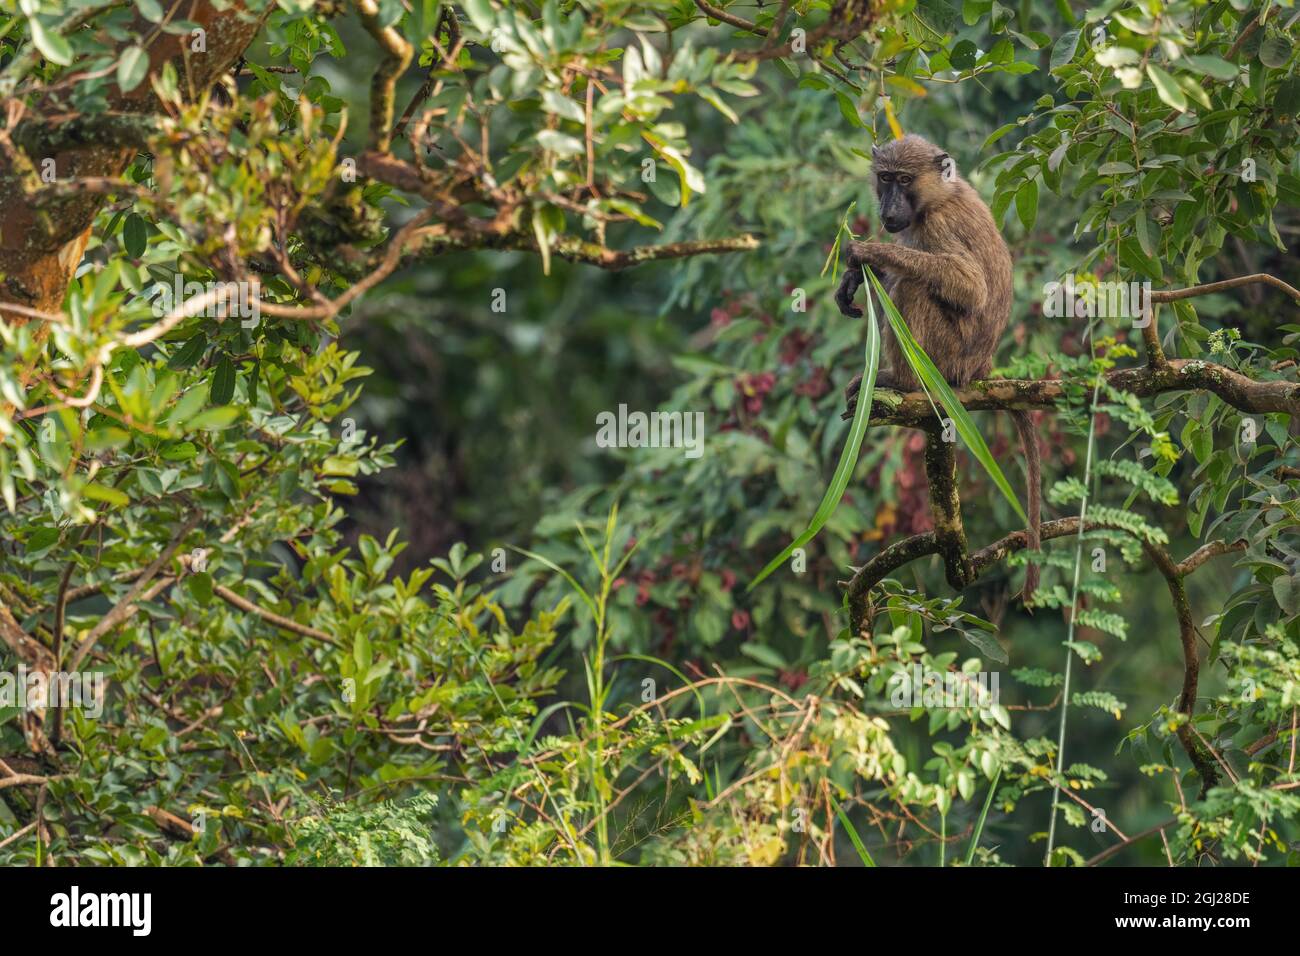 Olive Baboon - Papio anubis, large ground primate from African bushes and woodlands, Bale mountains, Budongo forest, Uganda. Stock Photo